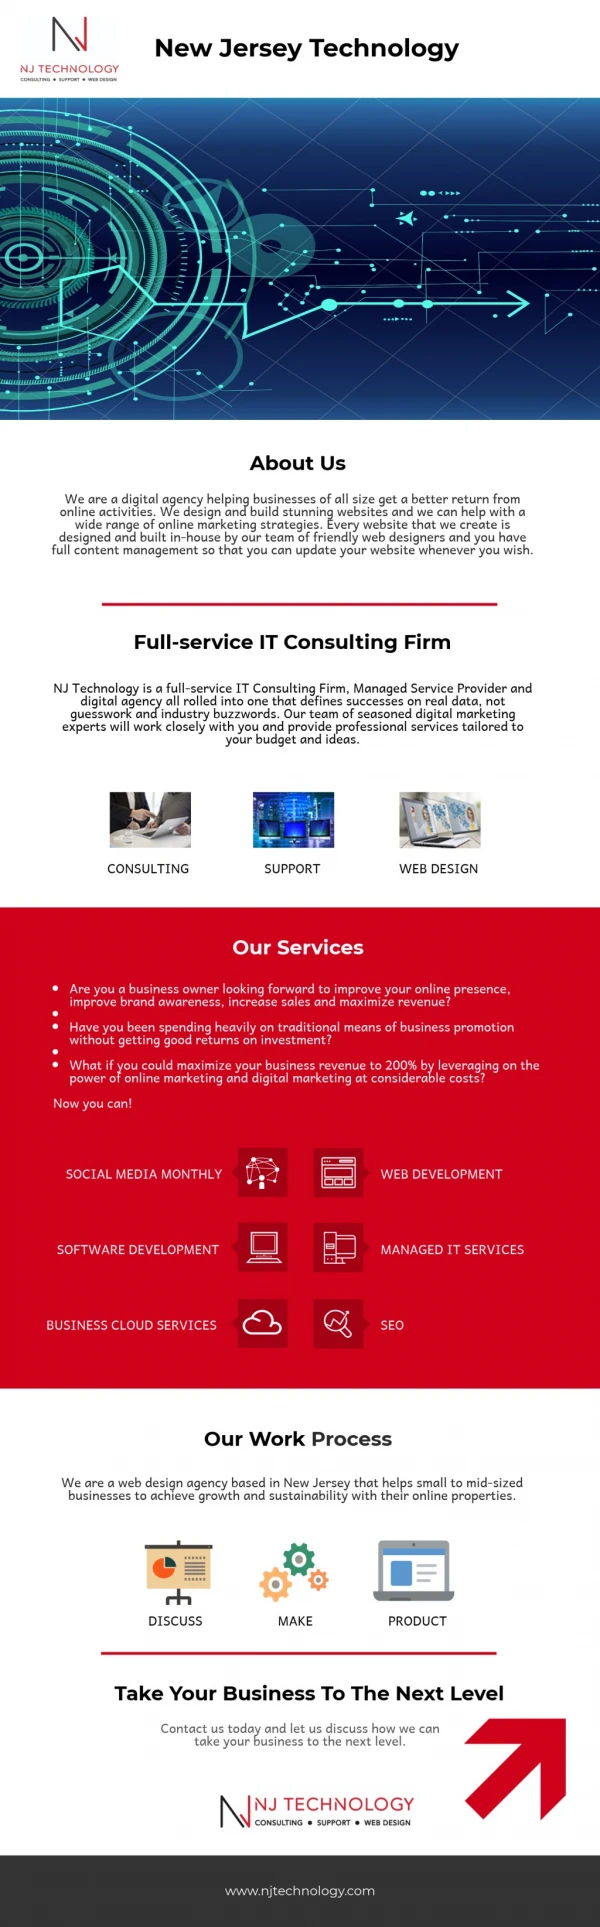 A full-service IT Consulting Firm